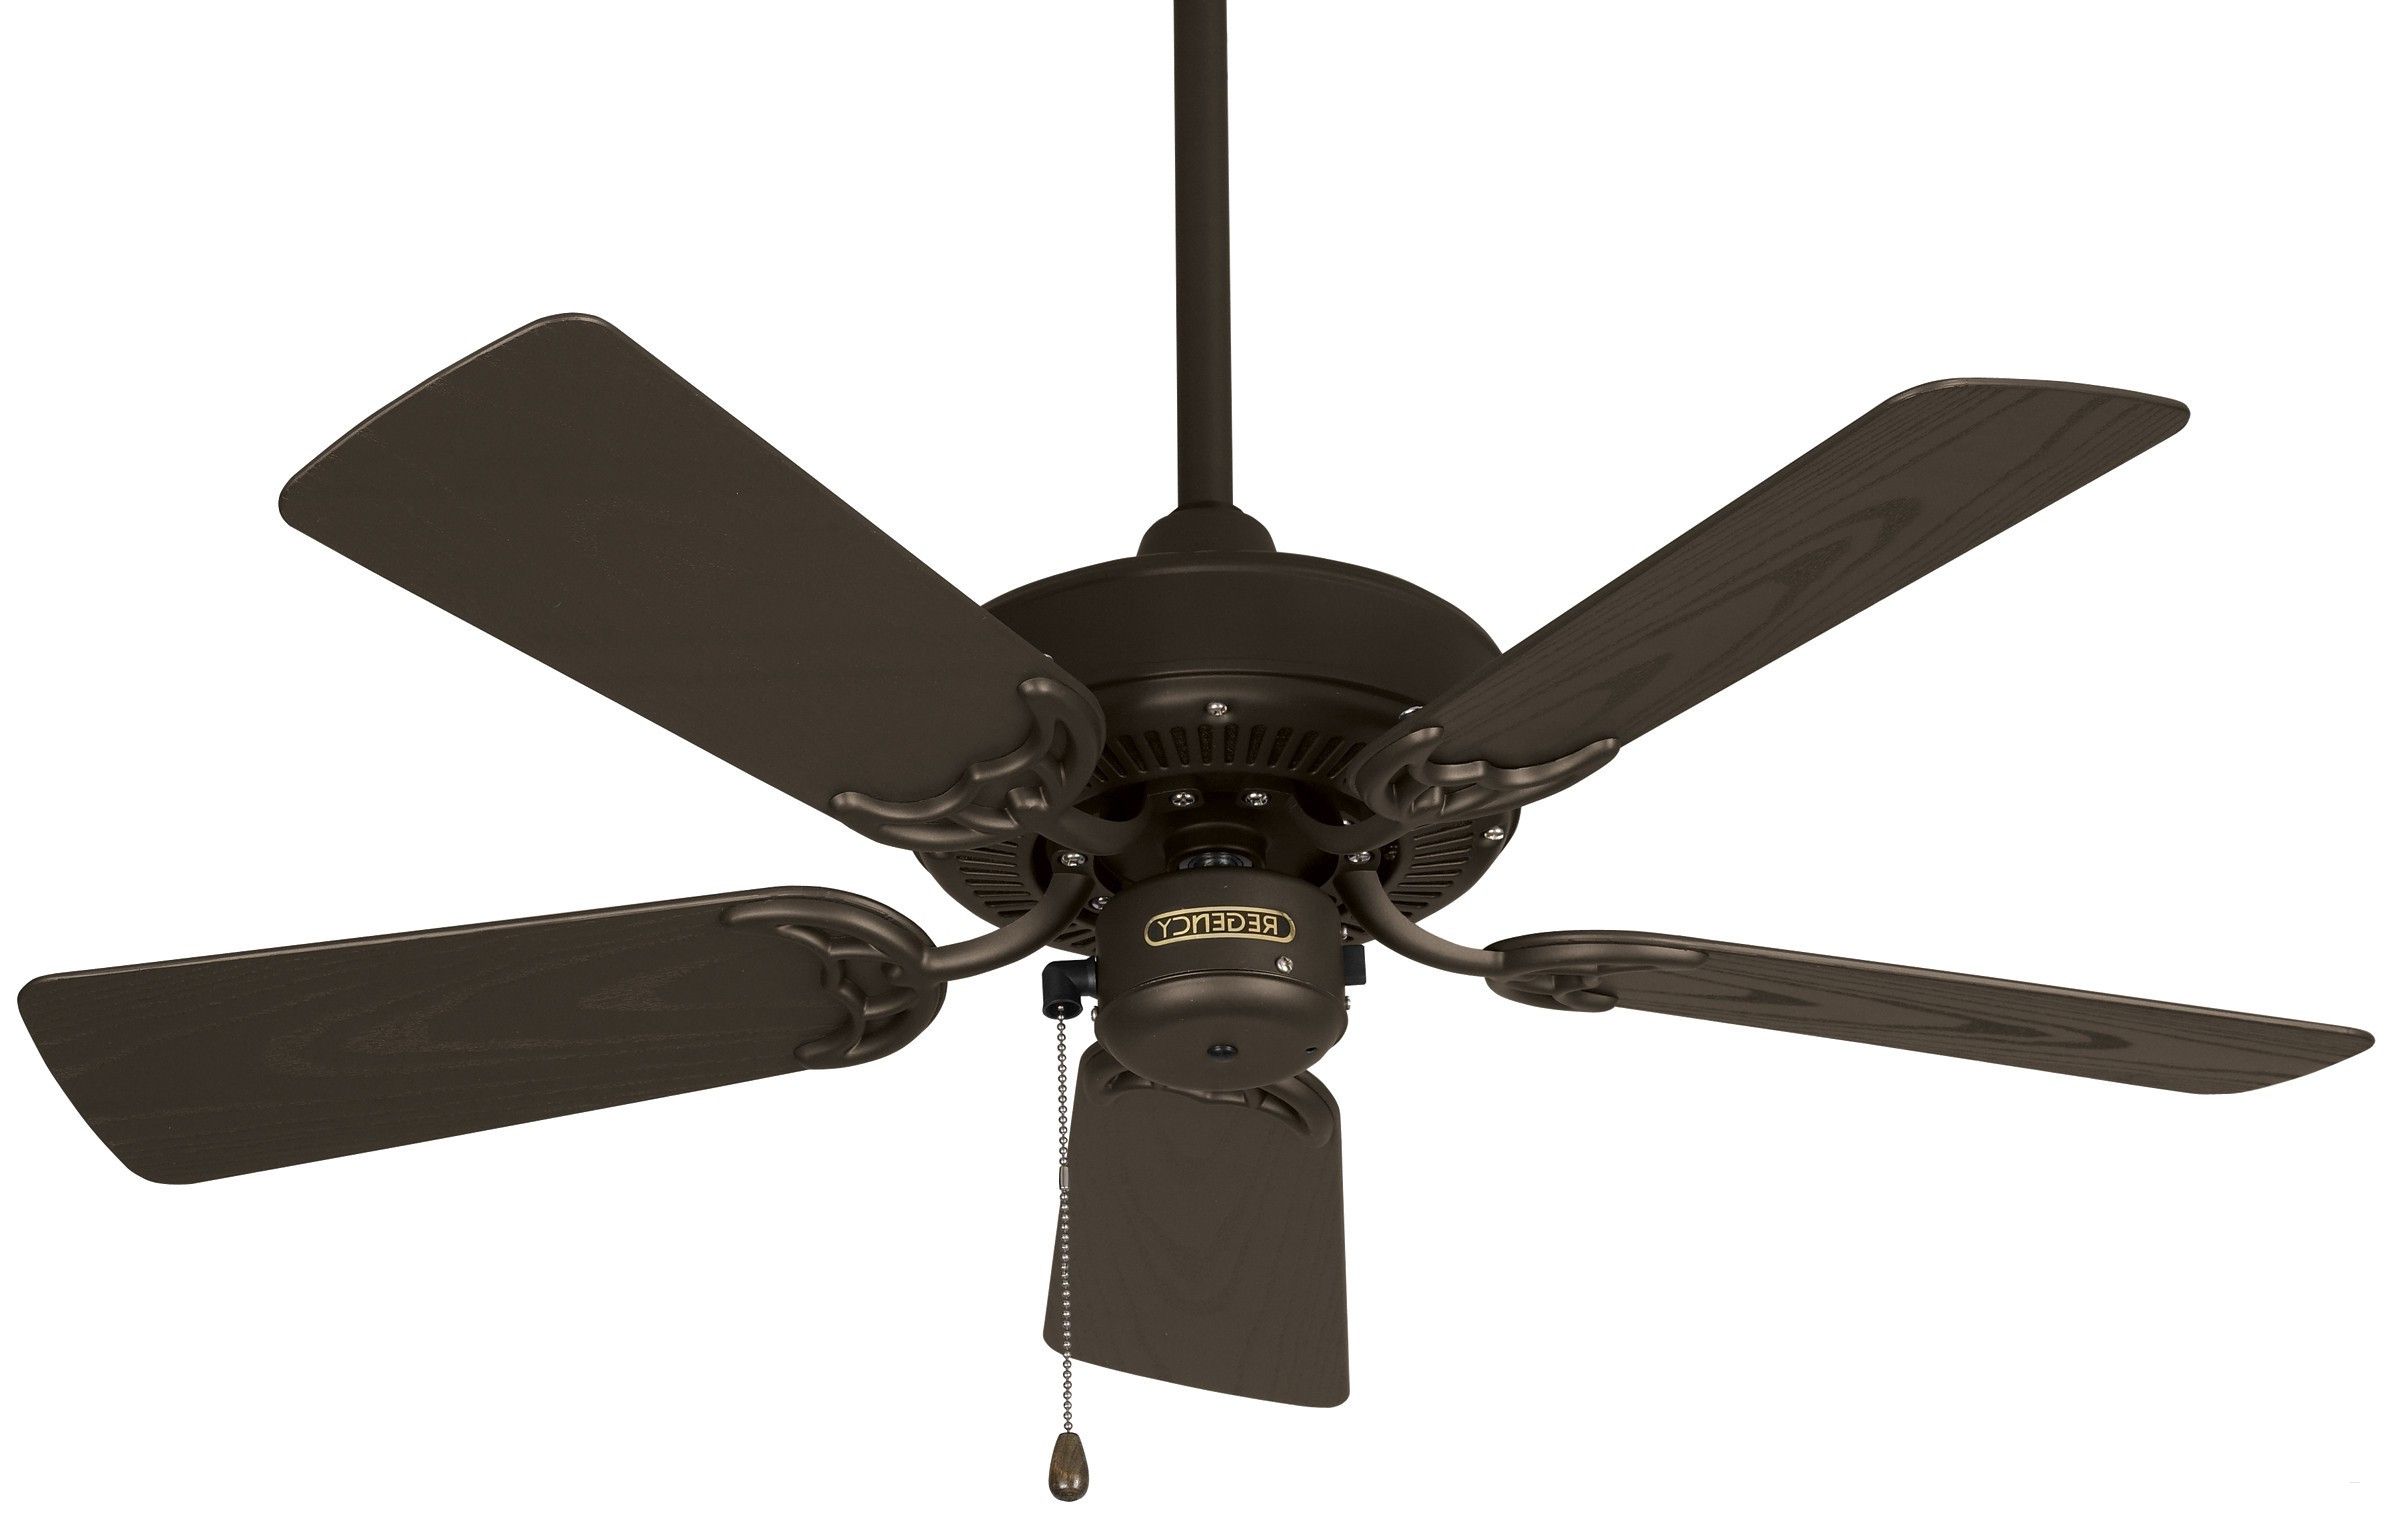 Outdoor Ceiling Fan With Lights Inspirational Dark Aged Bronze Intended For Preferred Outdoor Ceiling Fans With Lantern Light (View 18 of 20)